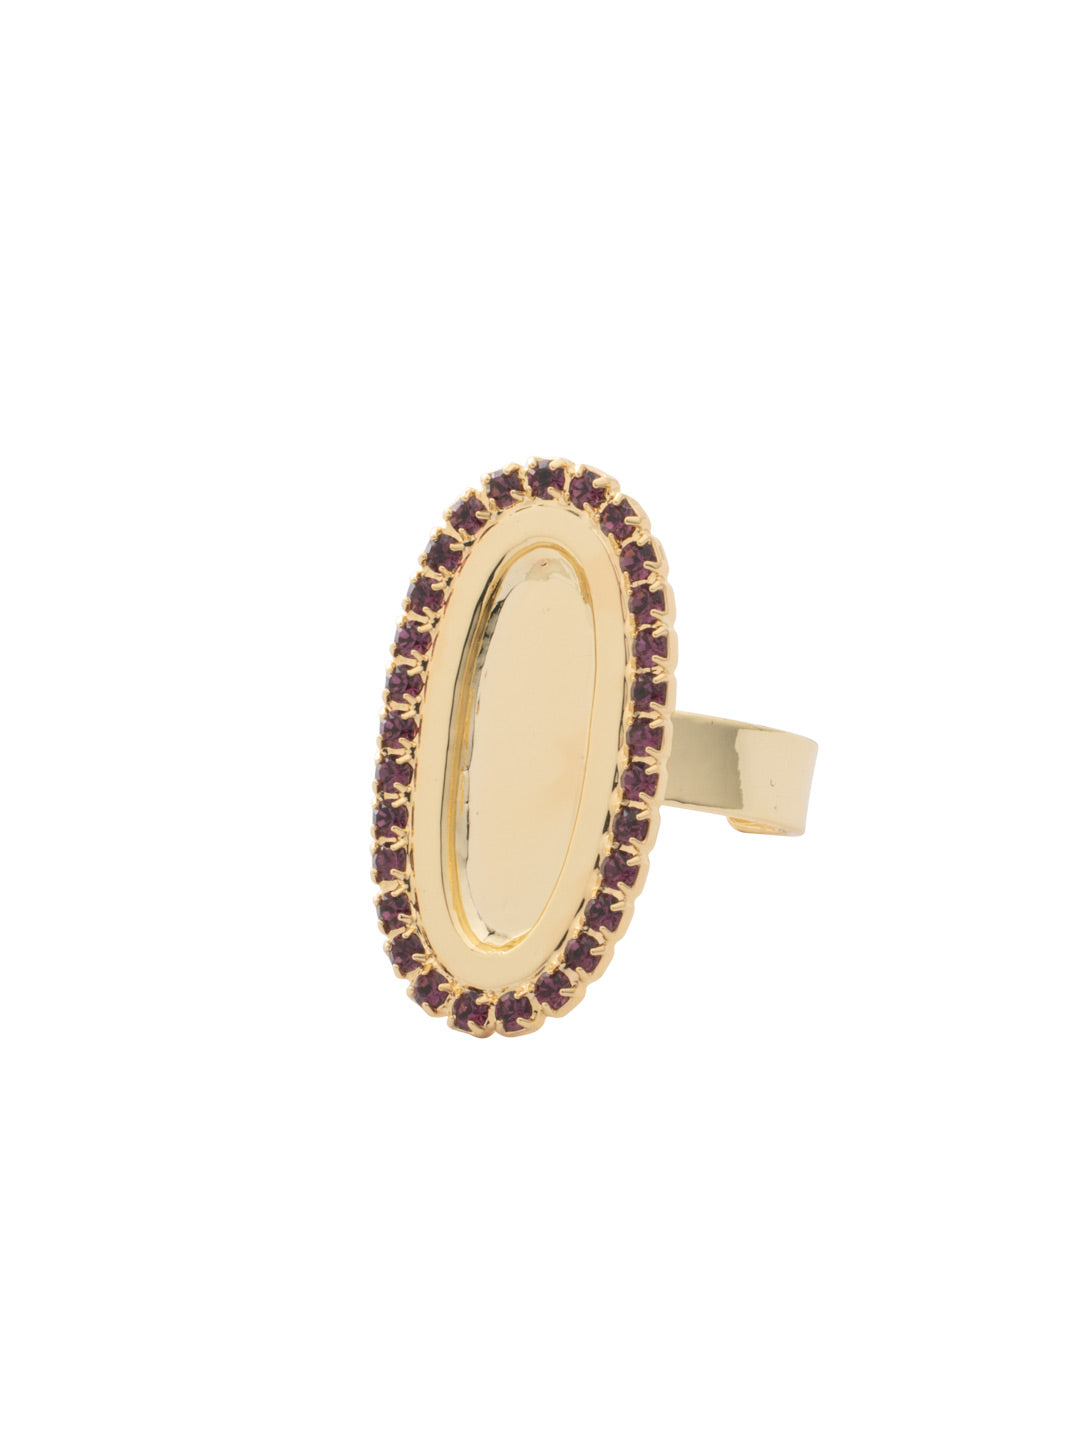 Tori Statement Ring - RFL3BGMRL - <p>The Tori Statement Ring features a rhinestone embellished filled chain link on an adjustable ring band. From Sorrelli's Merlot collection in our Bright Gold-tone finish.</p>